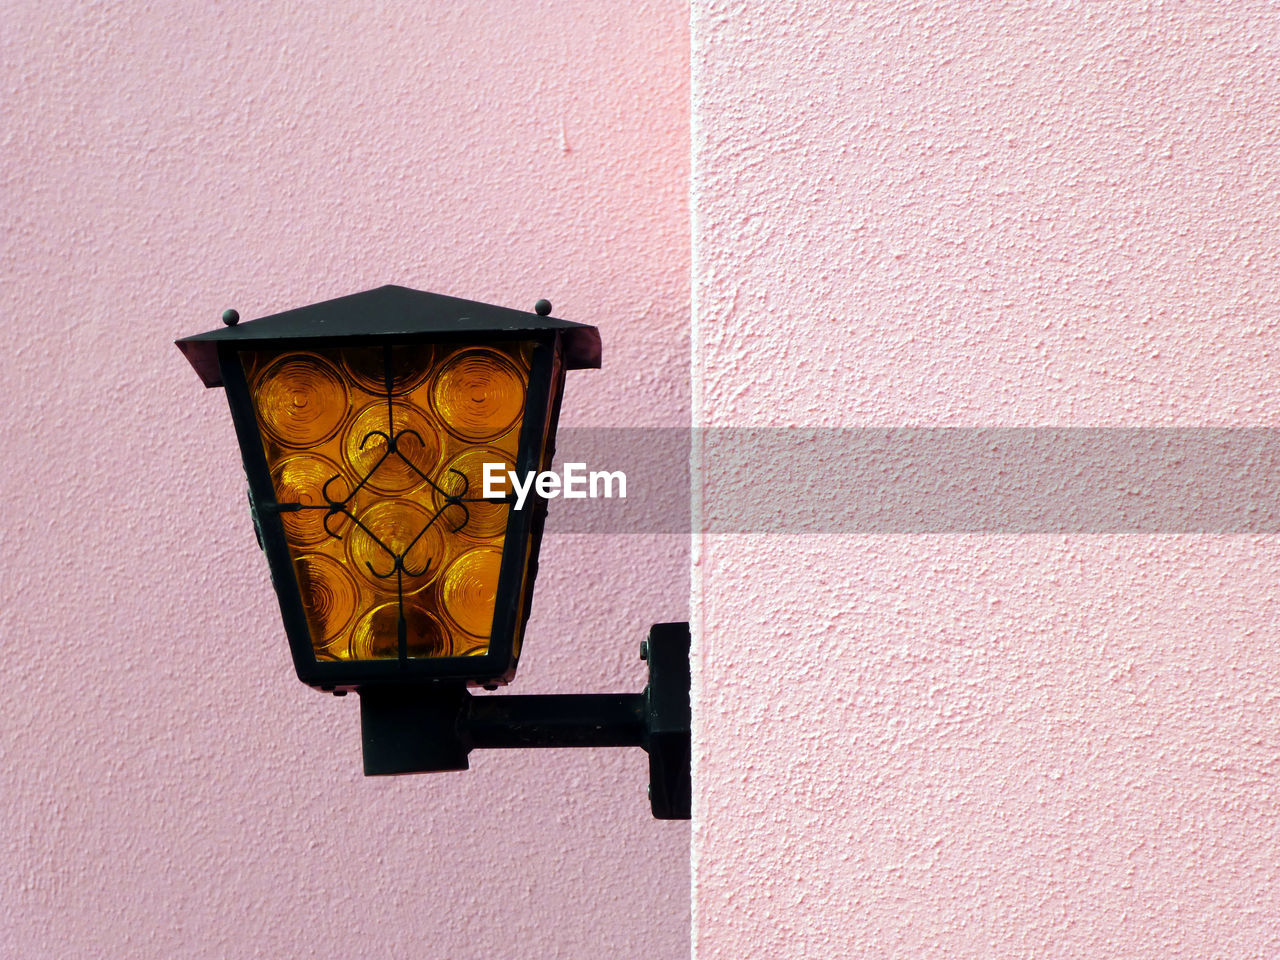 Charming view of the amber-black lamp against a light pink wall